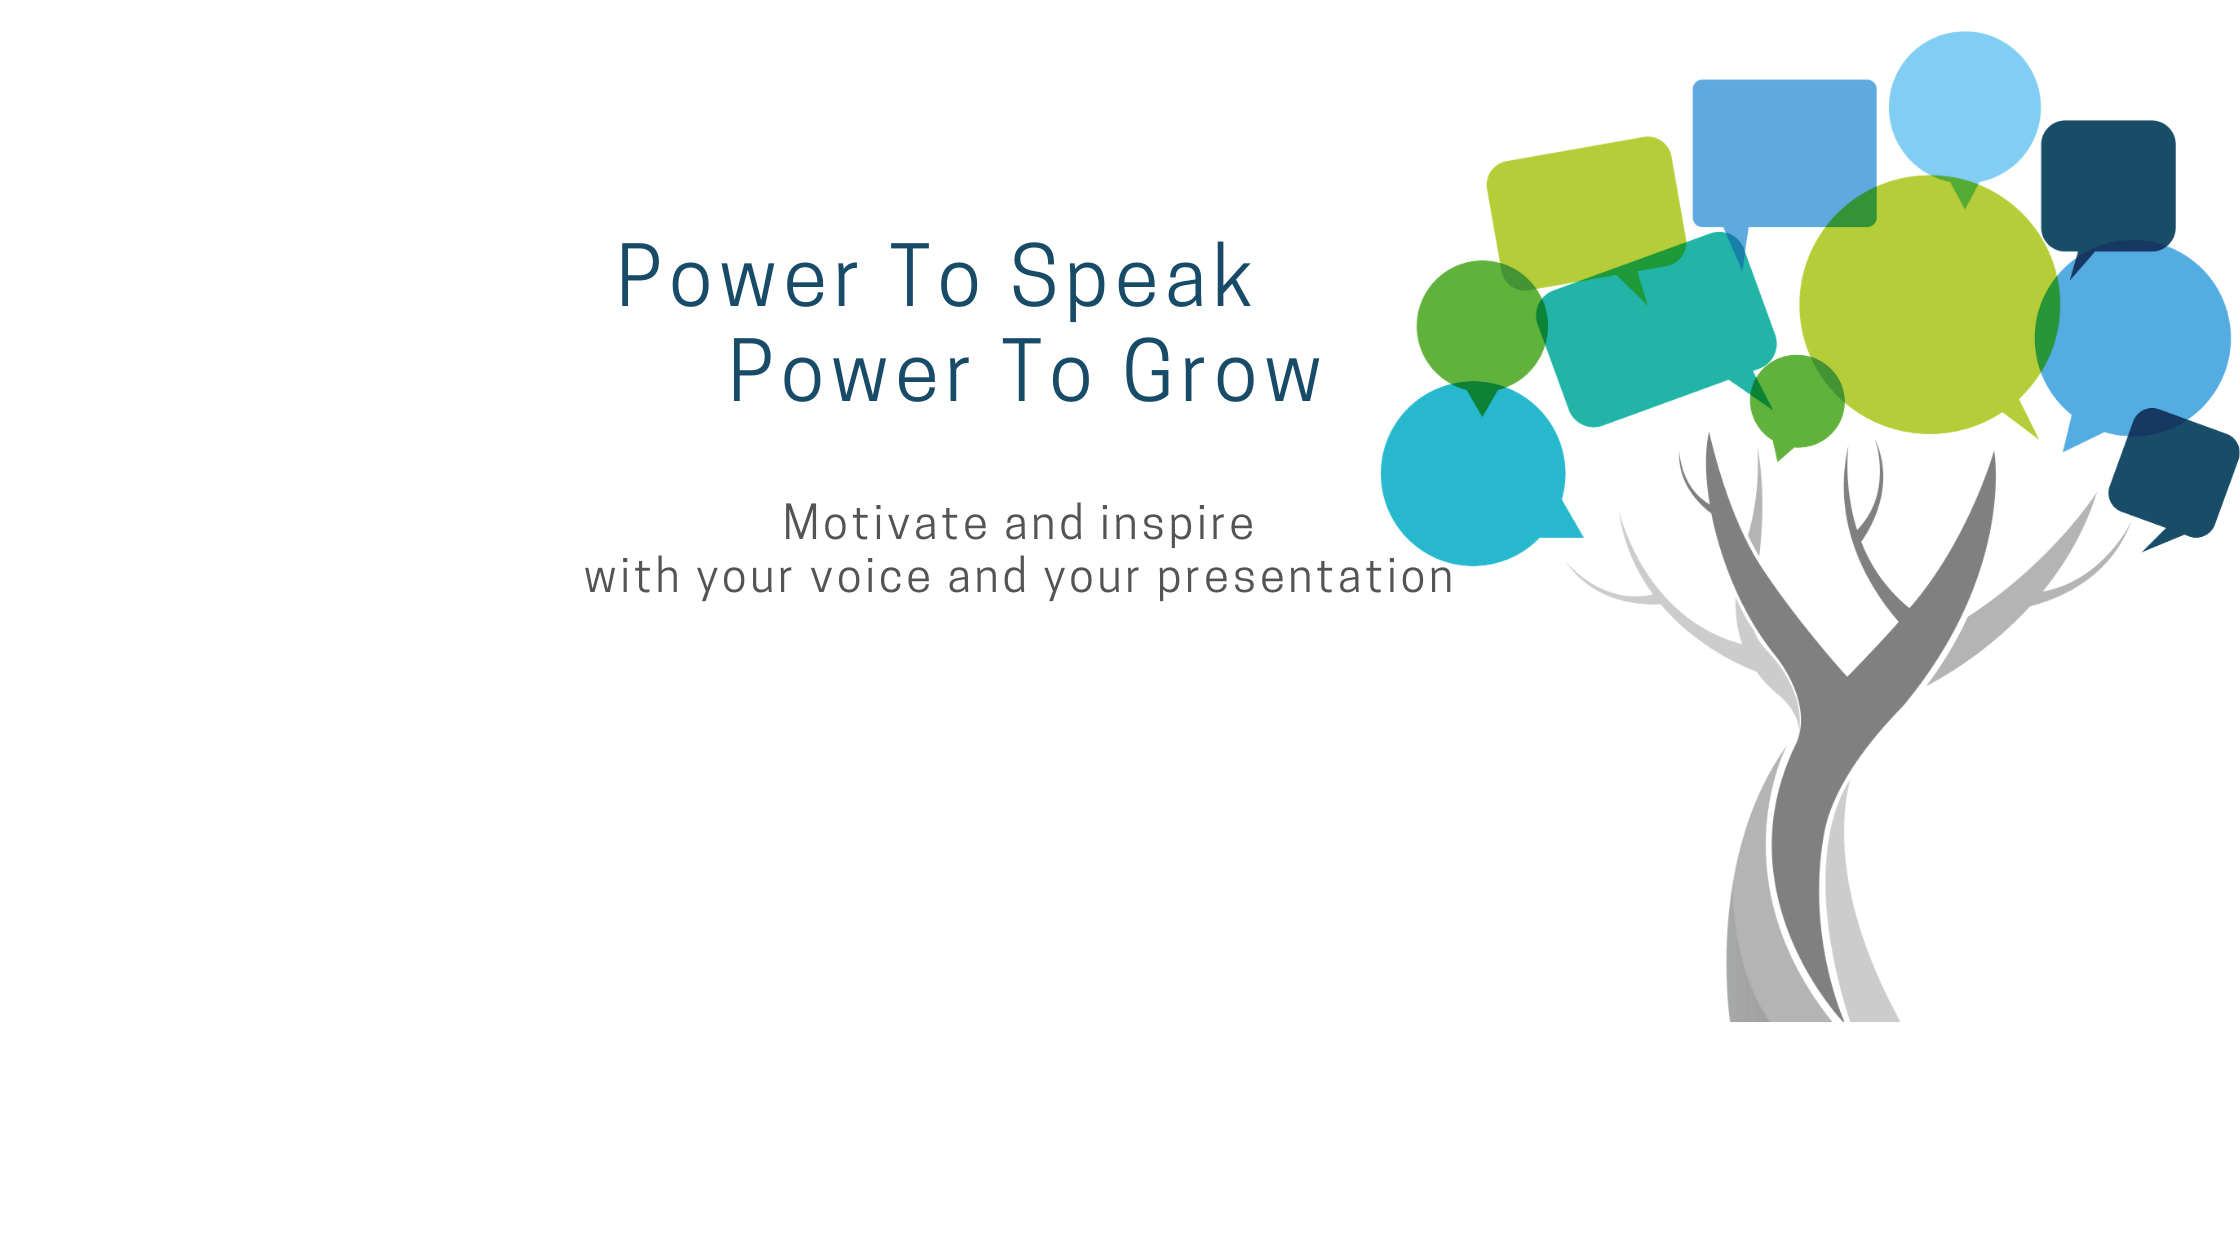 Power To Speak: Find your voice with conversations that will inspire and empower.